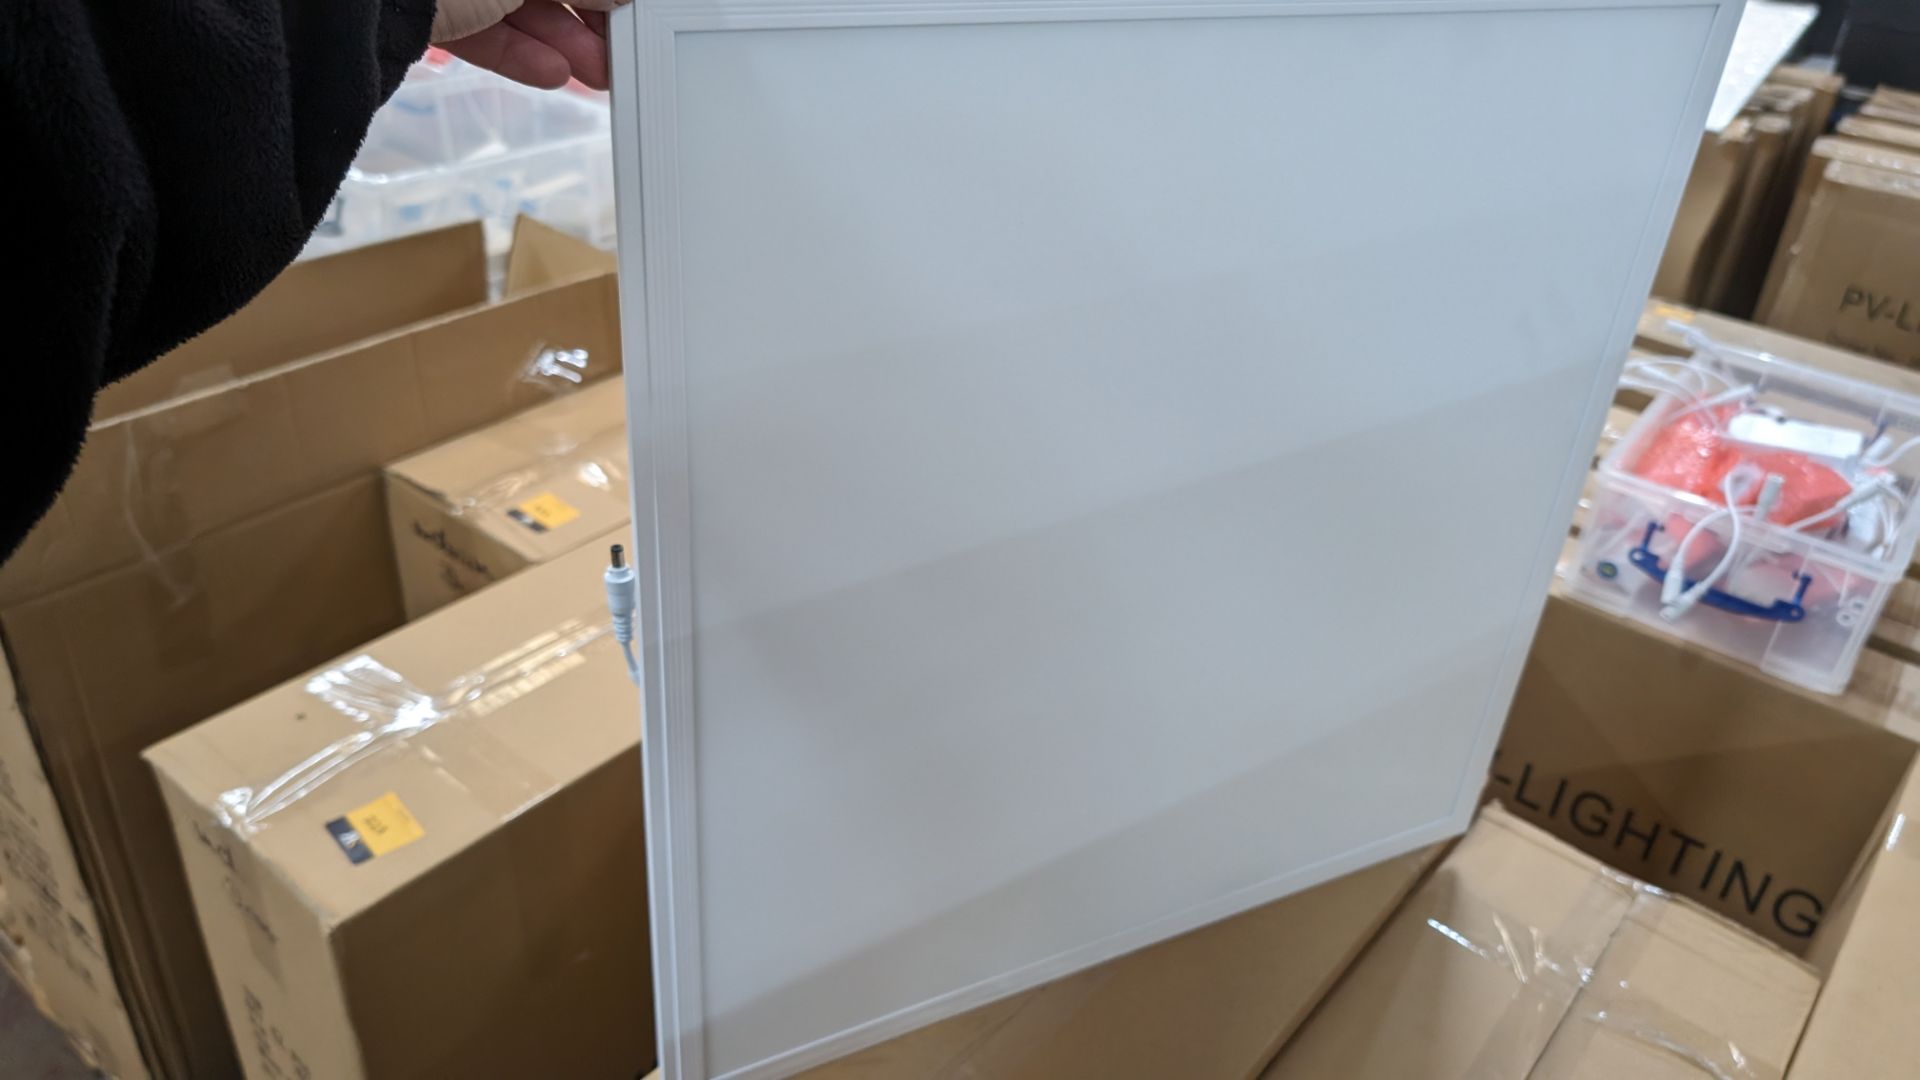 12 off 595mm x 595mm 5500k 45w LED lighting panels, each including driver - 1 carton - Image 2 of 5